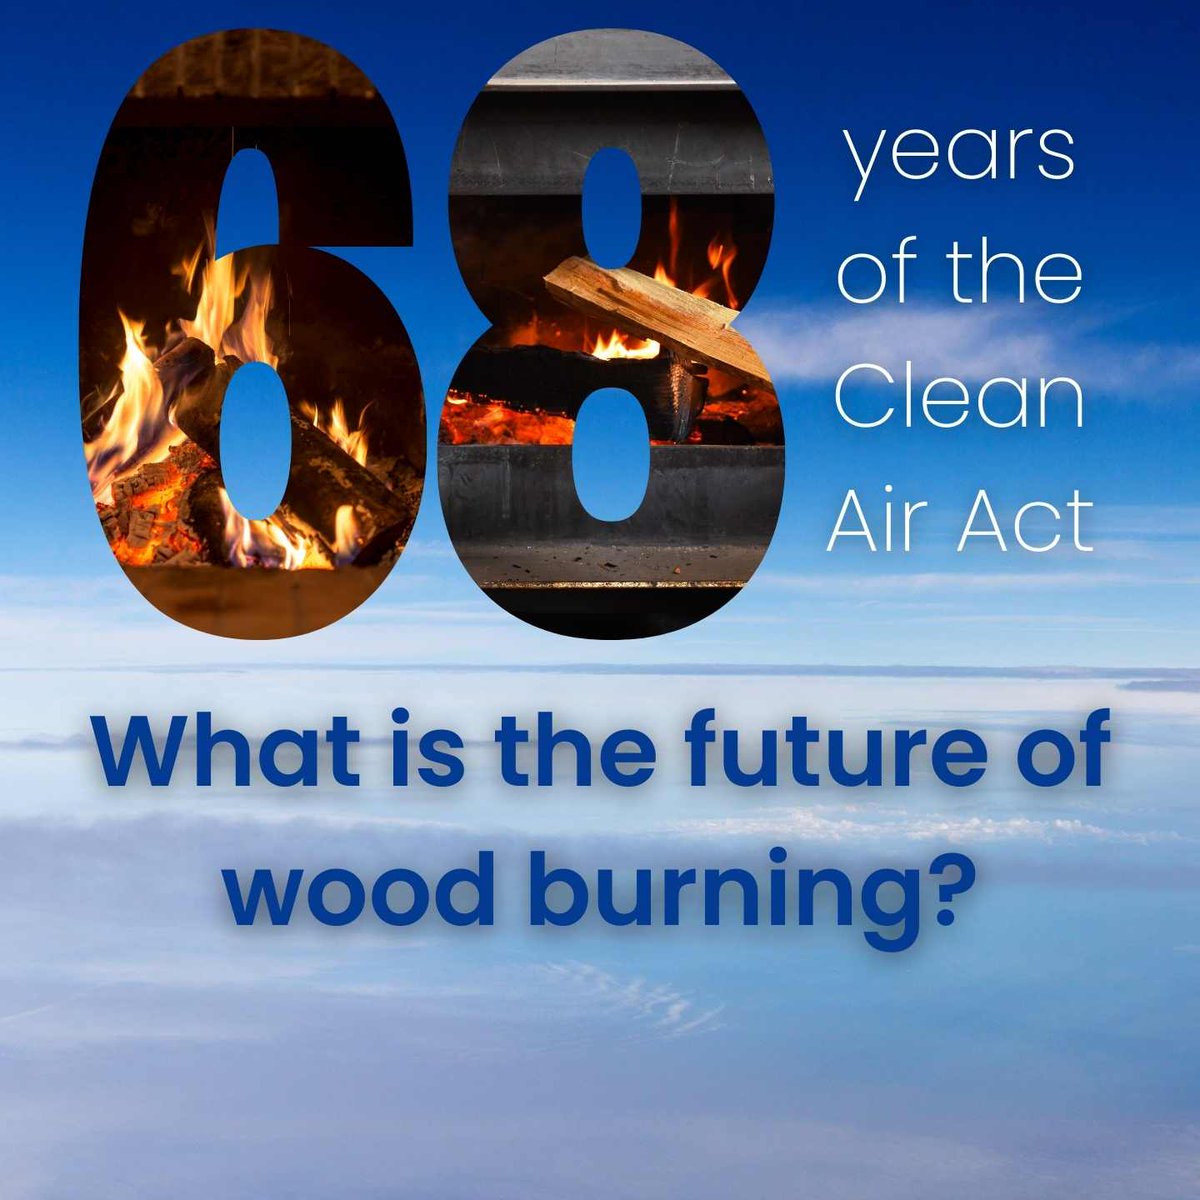 68 years of solid fuel burning regulation in London has helped improve air quality, so what is the future of wood burning in London? tinyurl.com/4869vn67 #woodburning #woodburninglondon #pollution #airpollution #airquality #londonair #cleanair #cleanairact